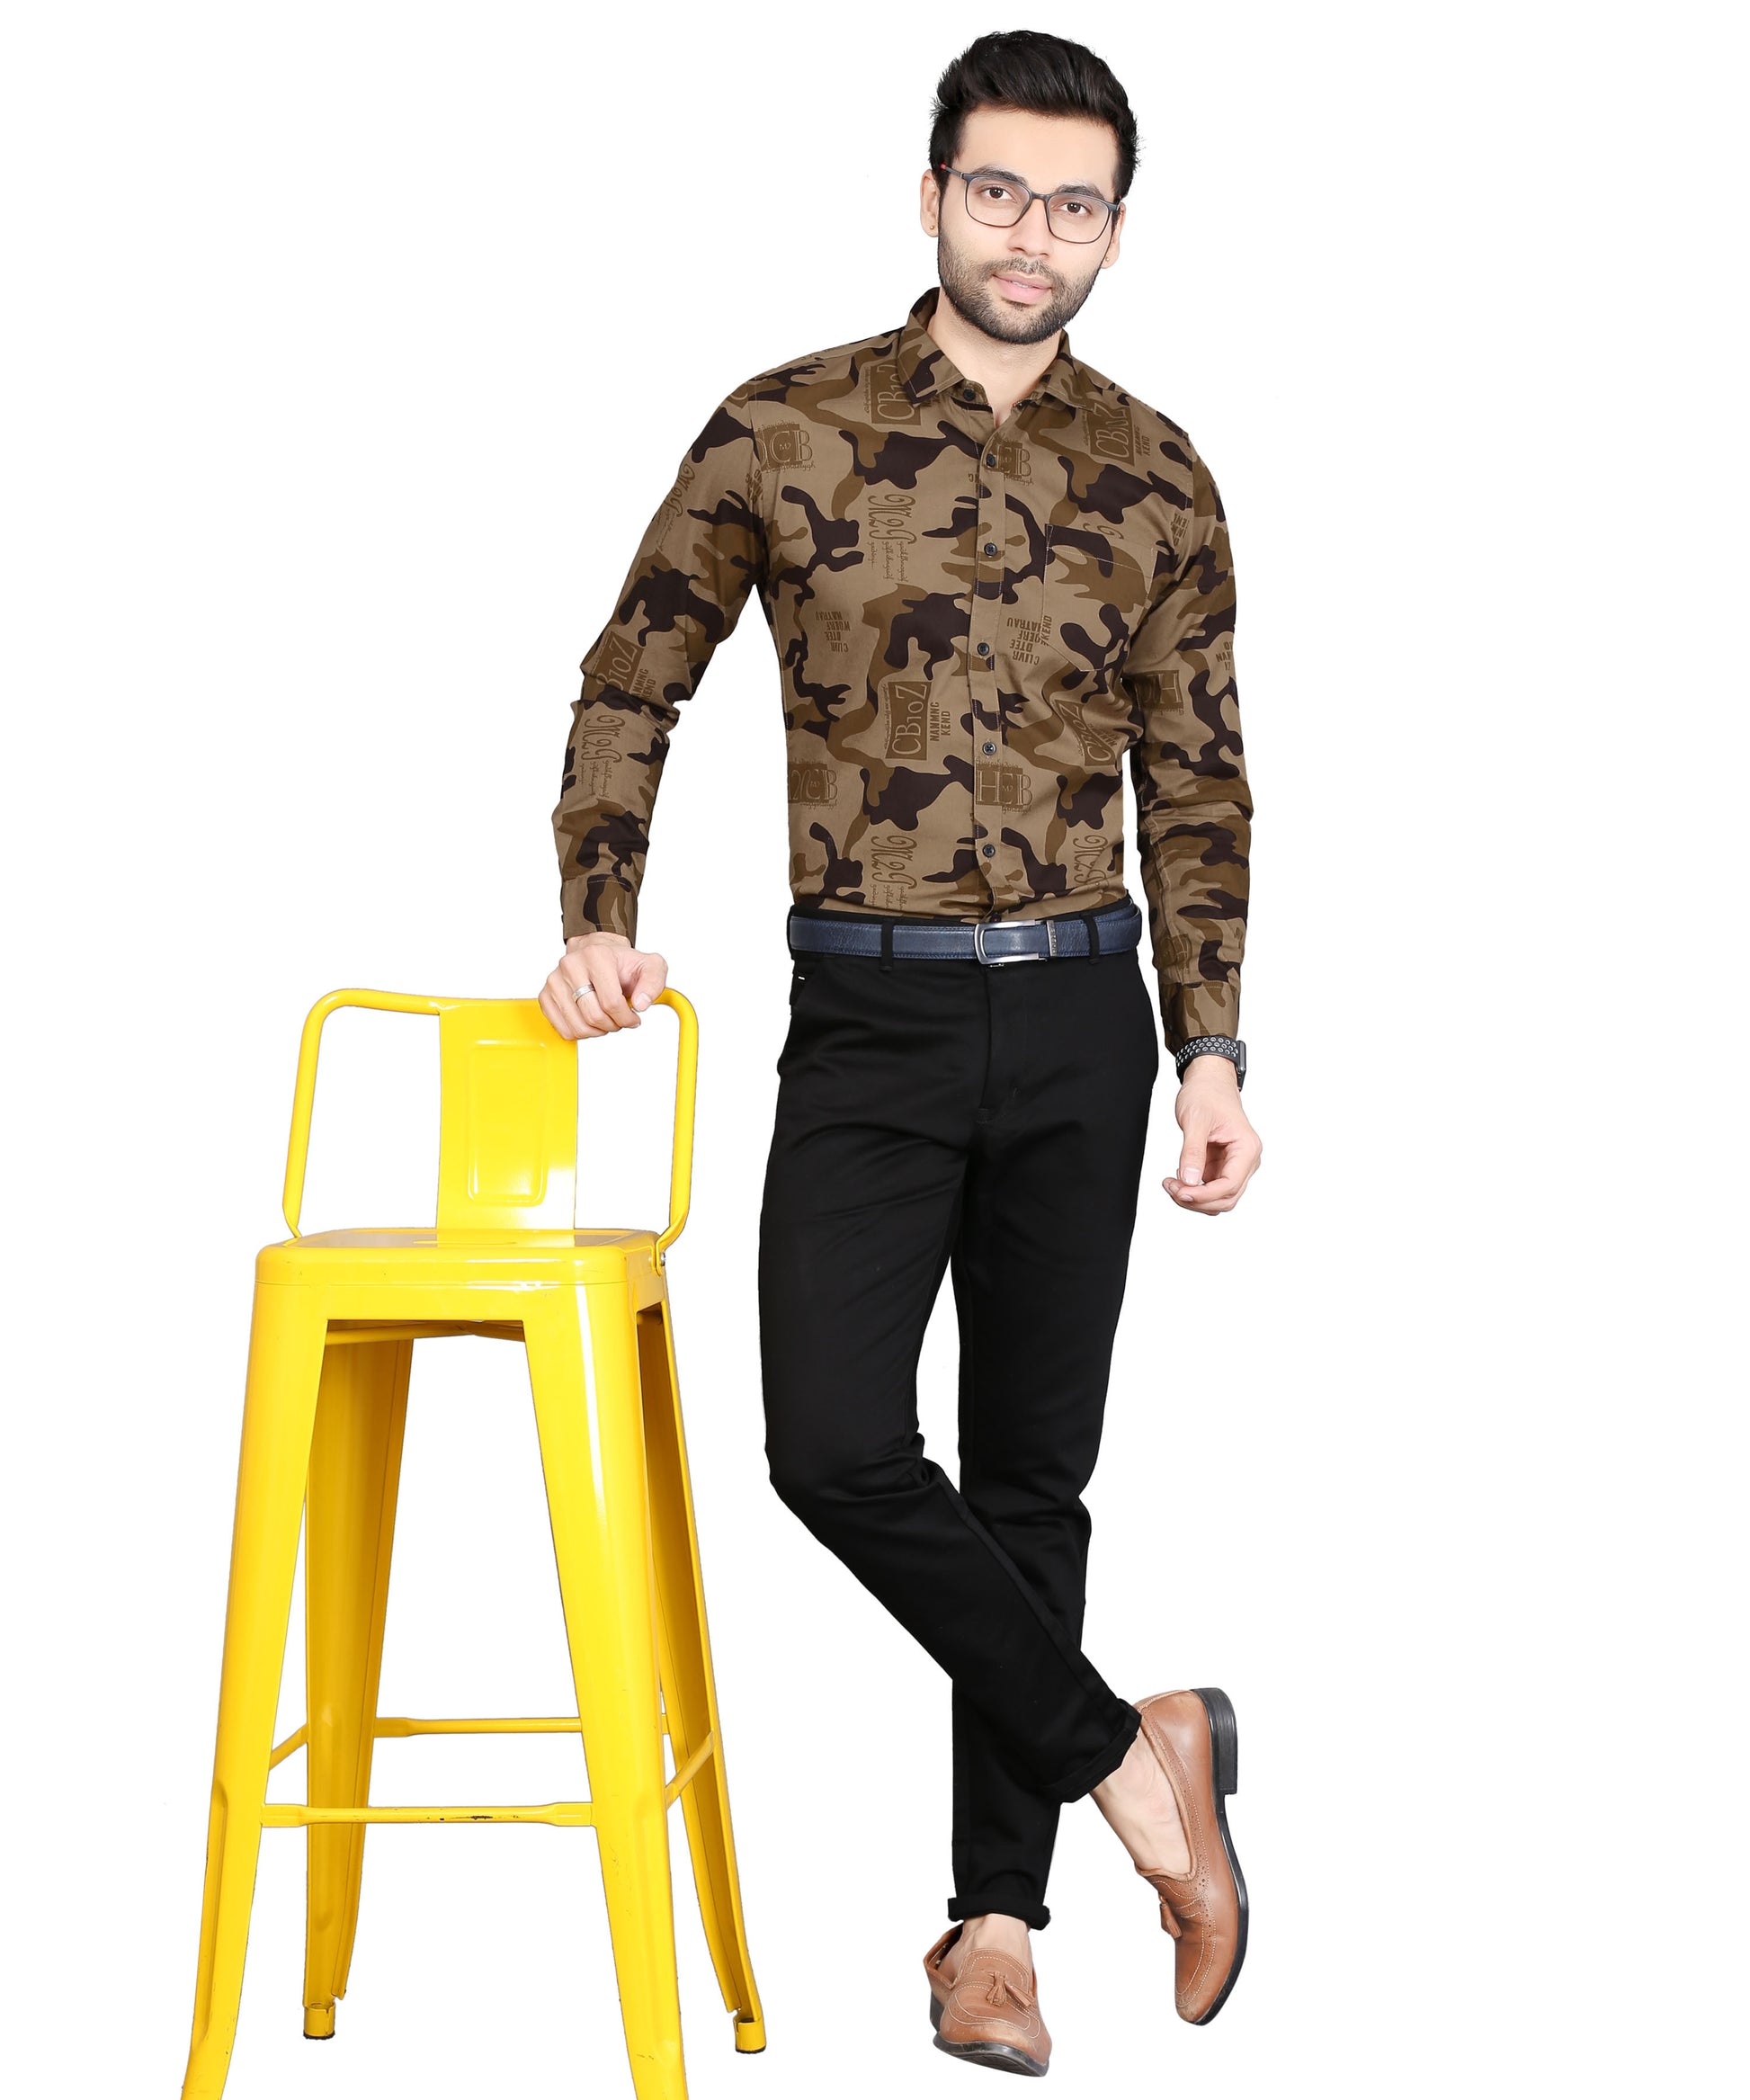 5thanfold Men's Formal Pure Cotton Full Sleeve Printed Brown Slim Fit Shirt